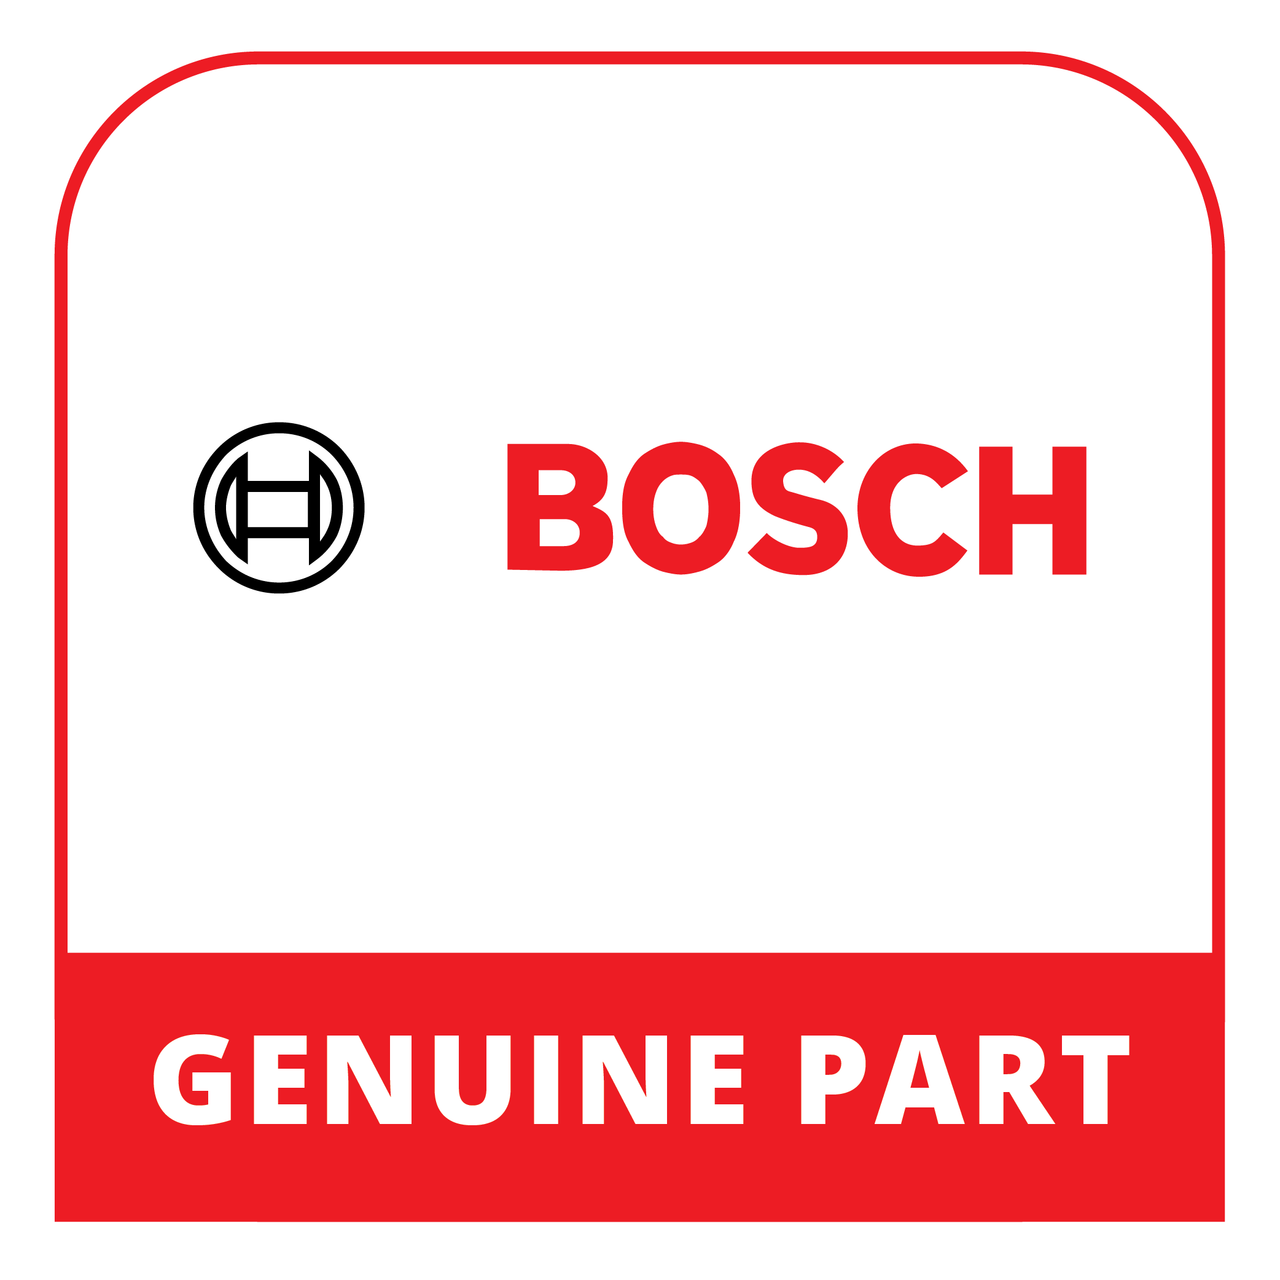 Bosch (Thermador) 12026843 - Cable Harness - Genuine Bosch (Thermador) Part